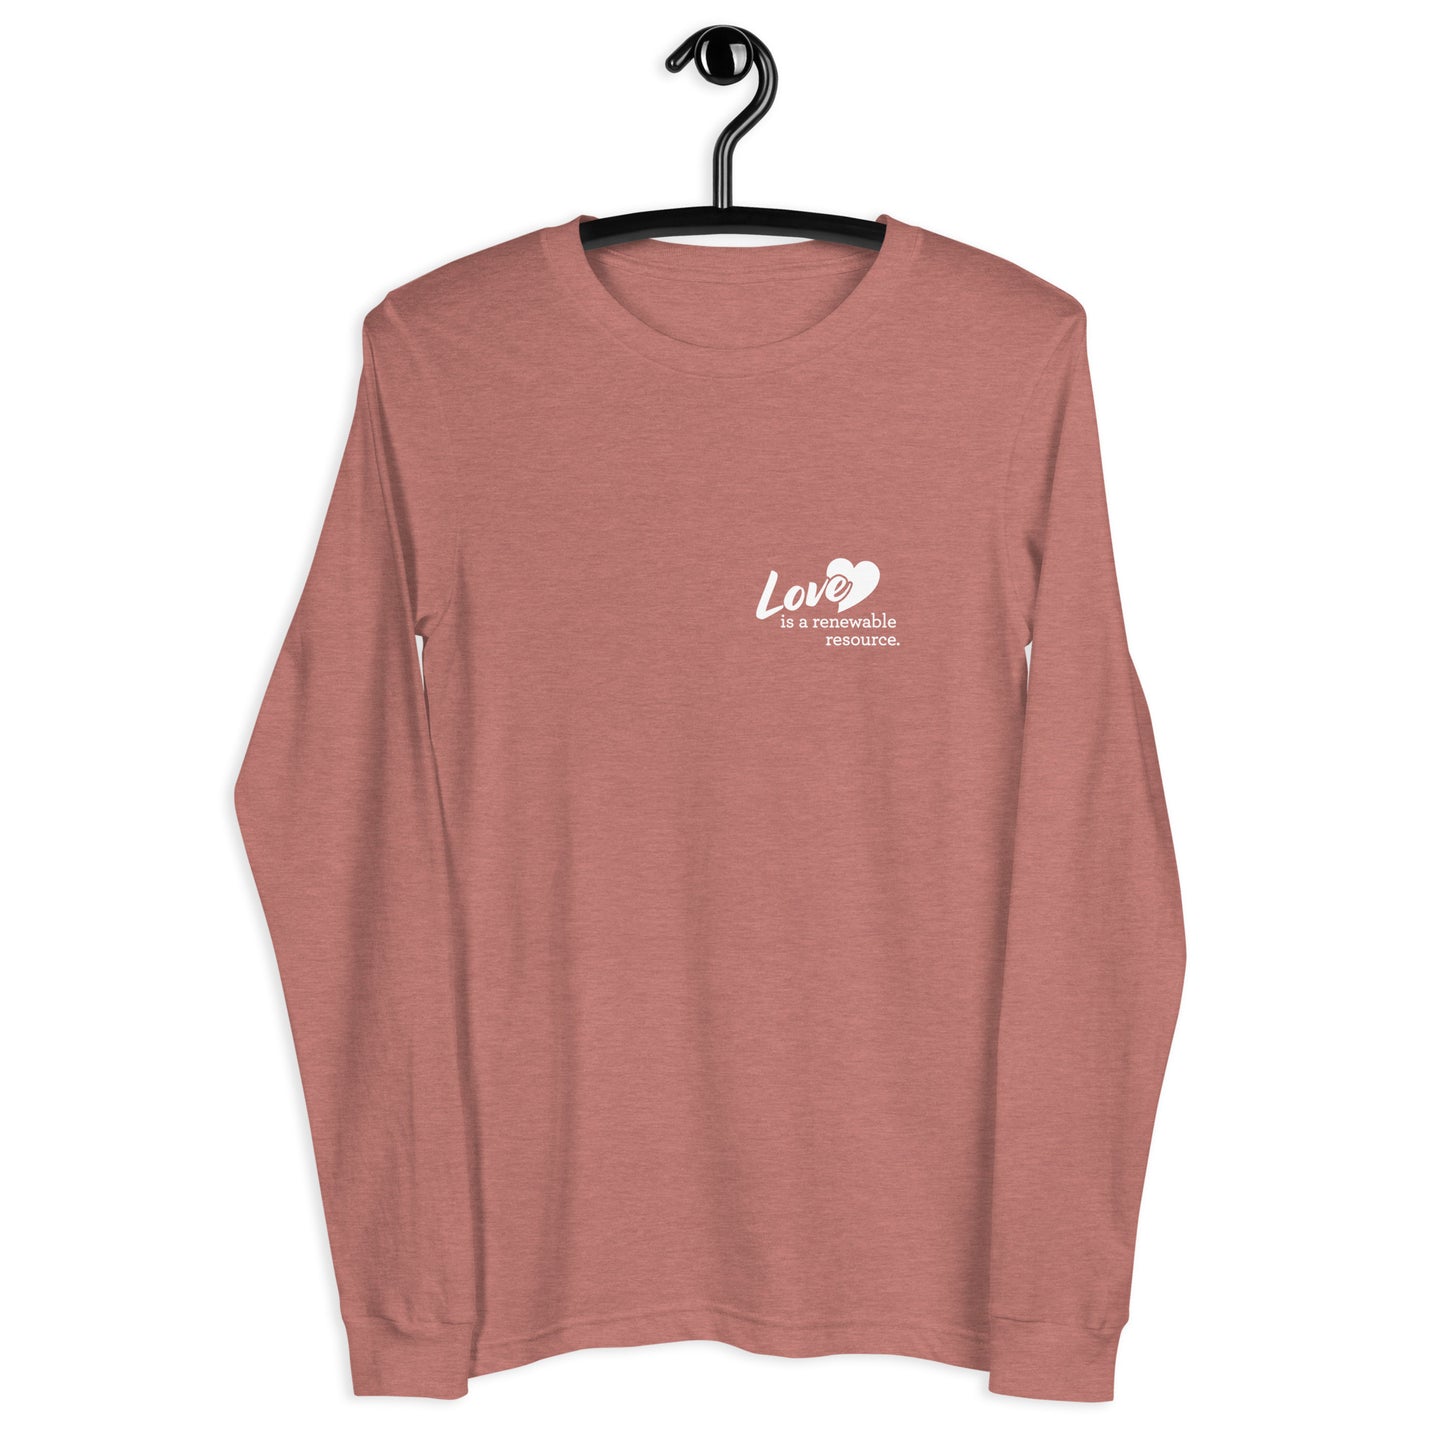 Love is a Renewable Resource (white graphic) - Unisex Long Sleeve Tee With Small Design